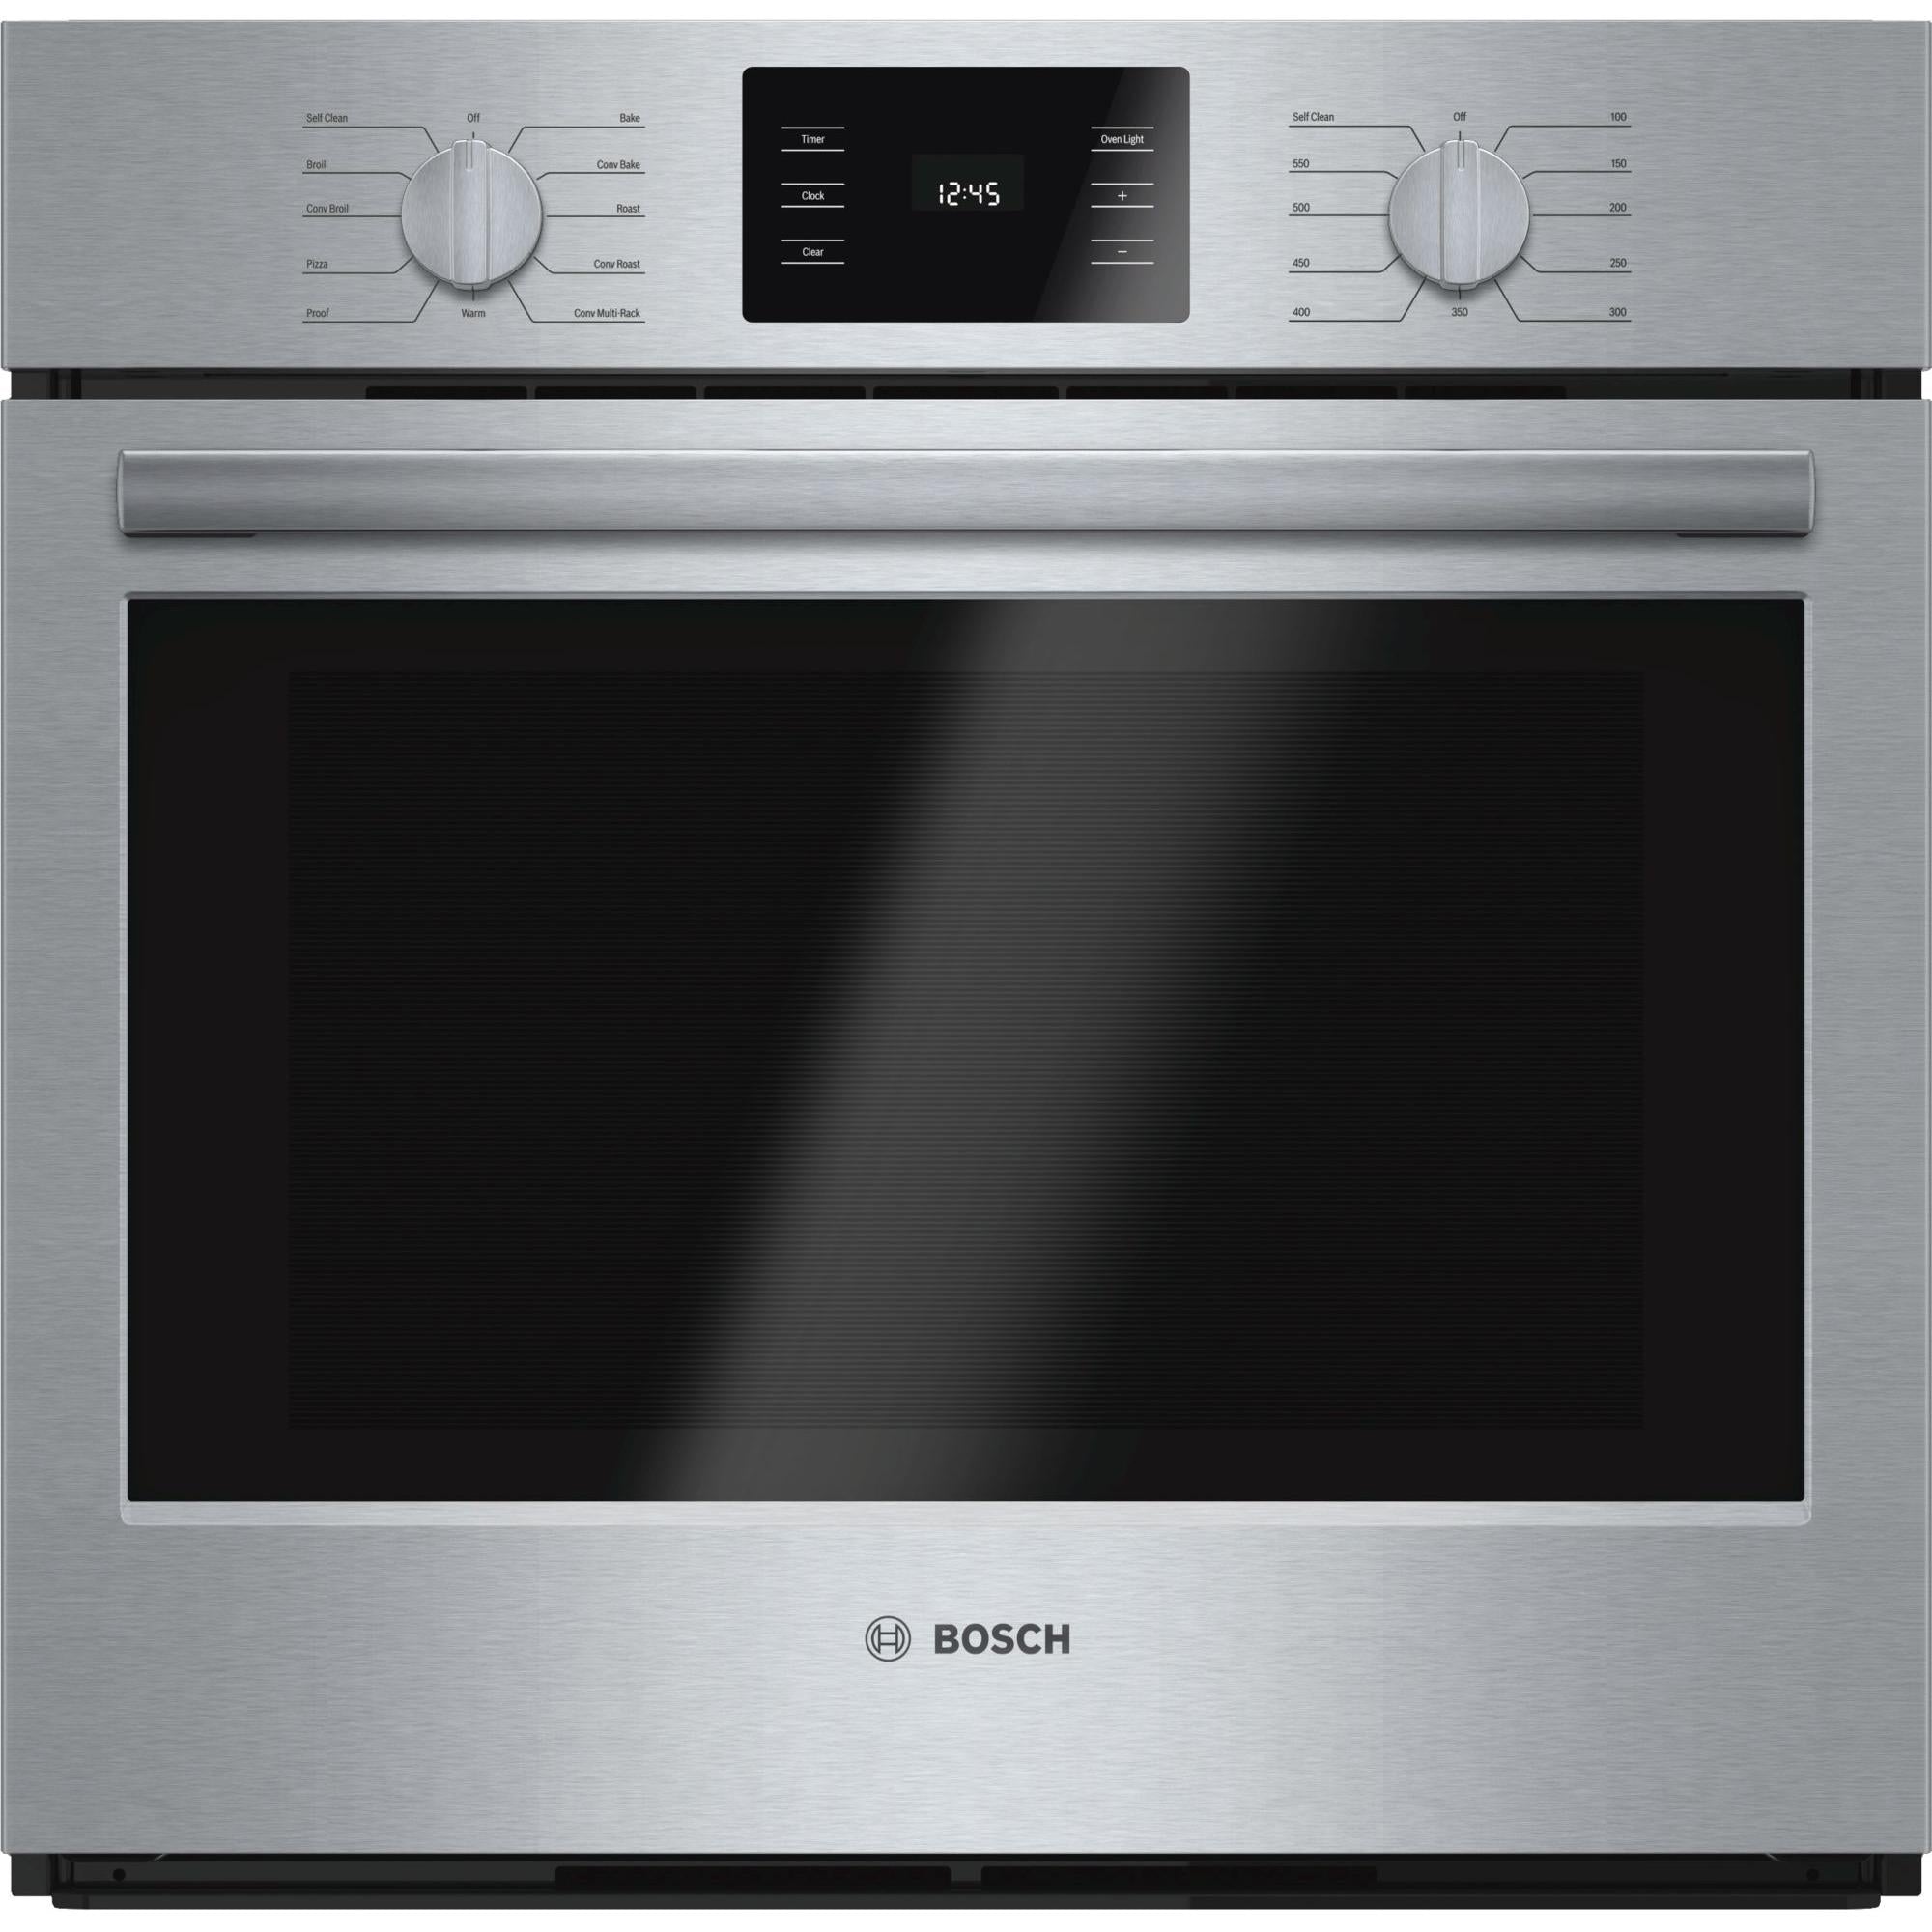 Bosch 30-inch, 4.6 cu. ft. Built-in Single Wall Oven with Convection HBL5451UC